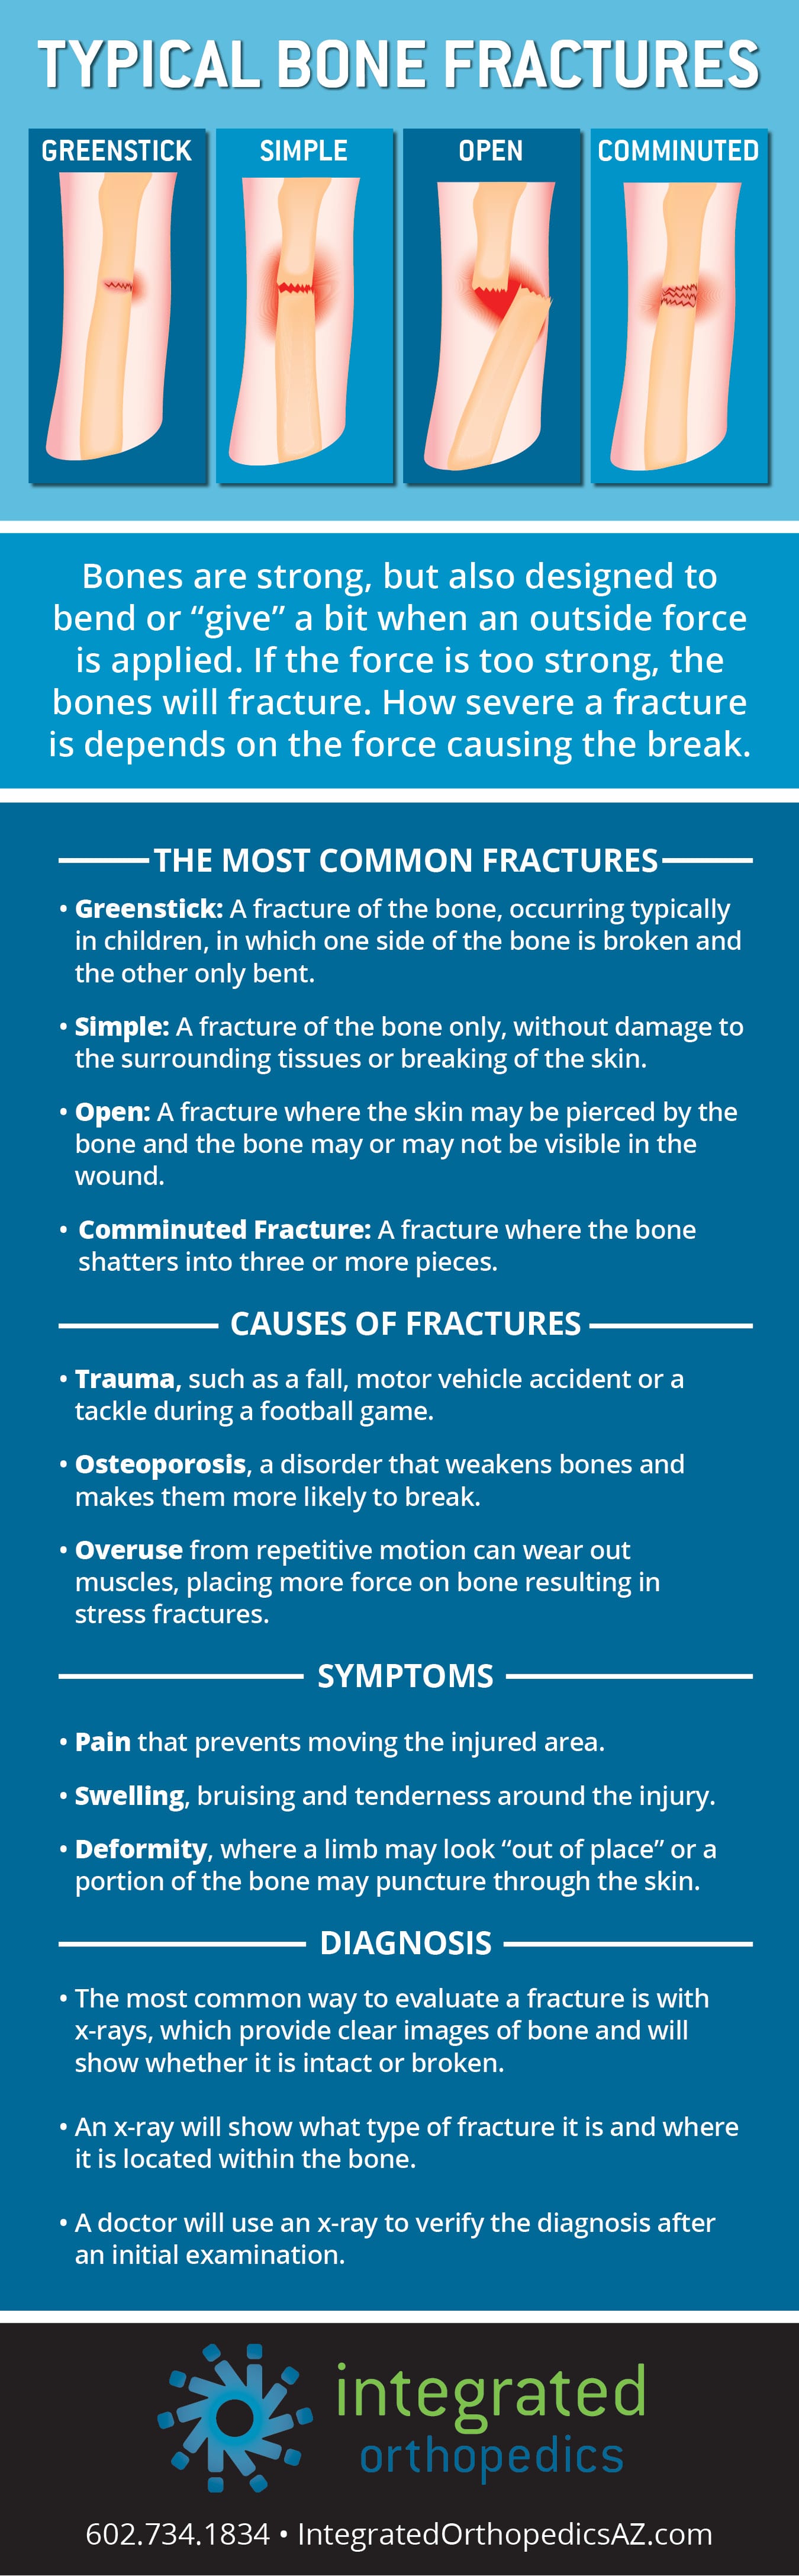 skull fracture signs